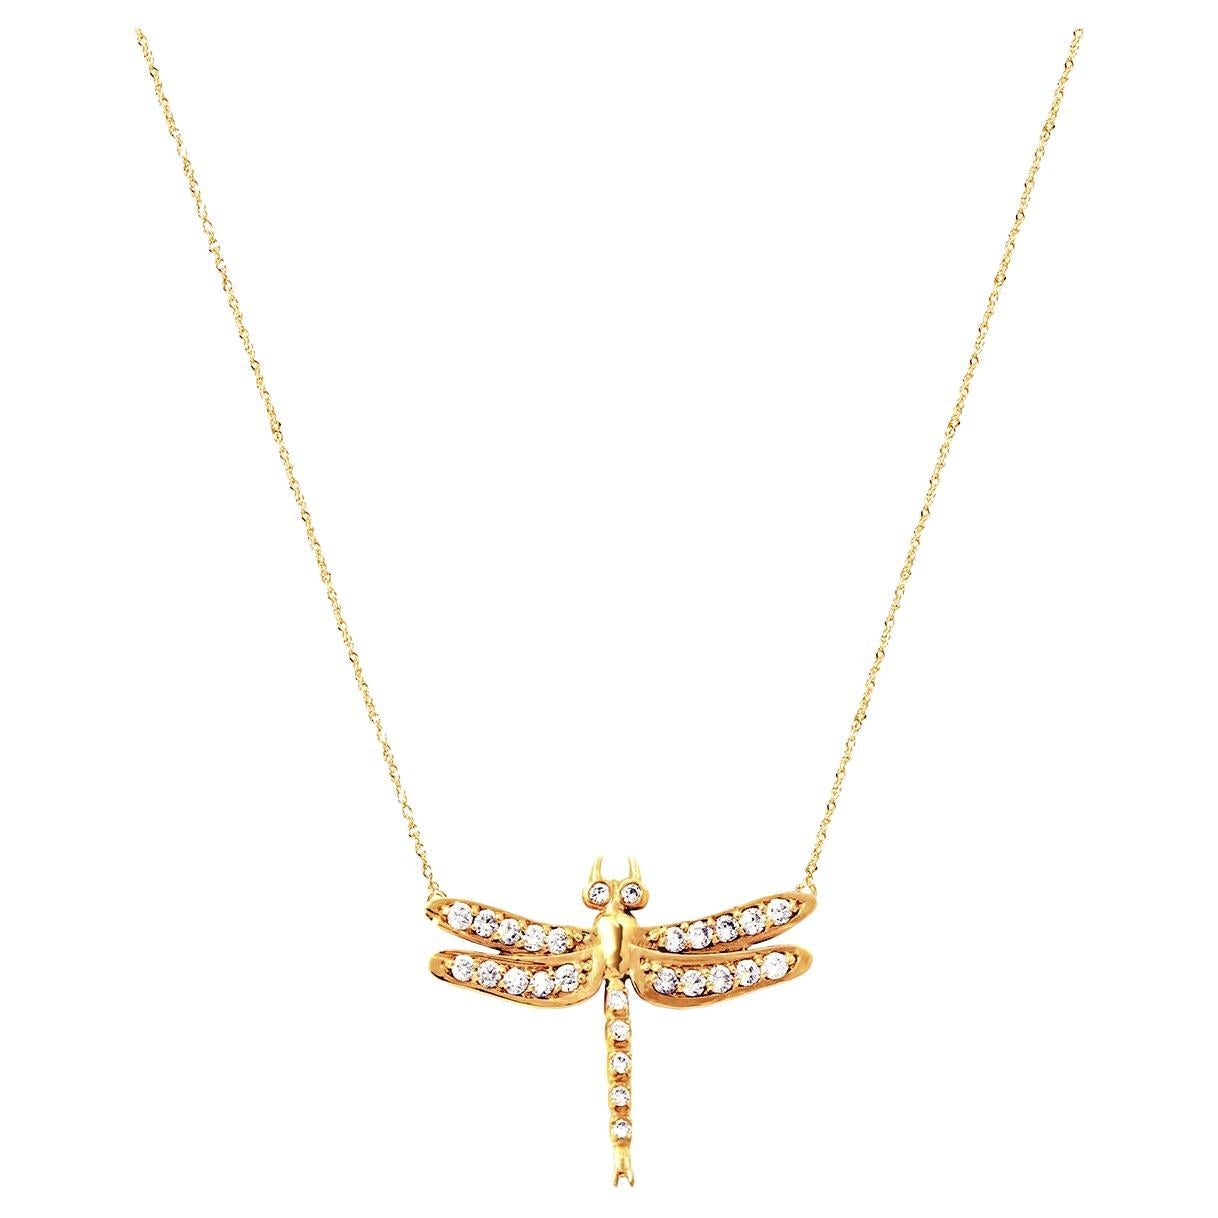 Small Dragonfly Necklace / Yellow Gold Plate White Sapphires